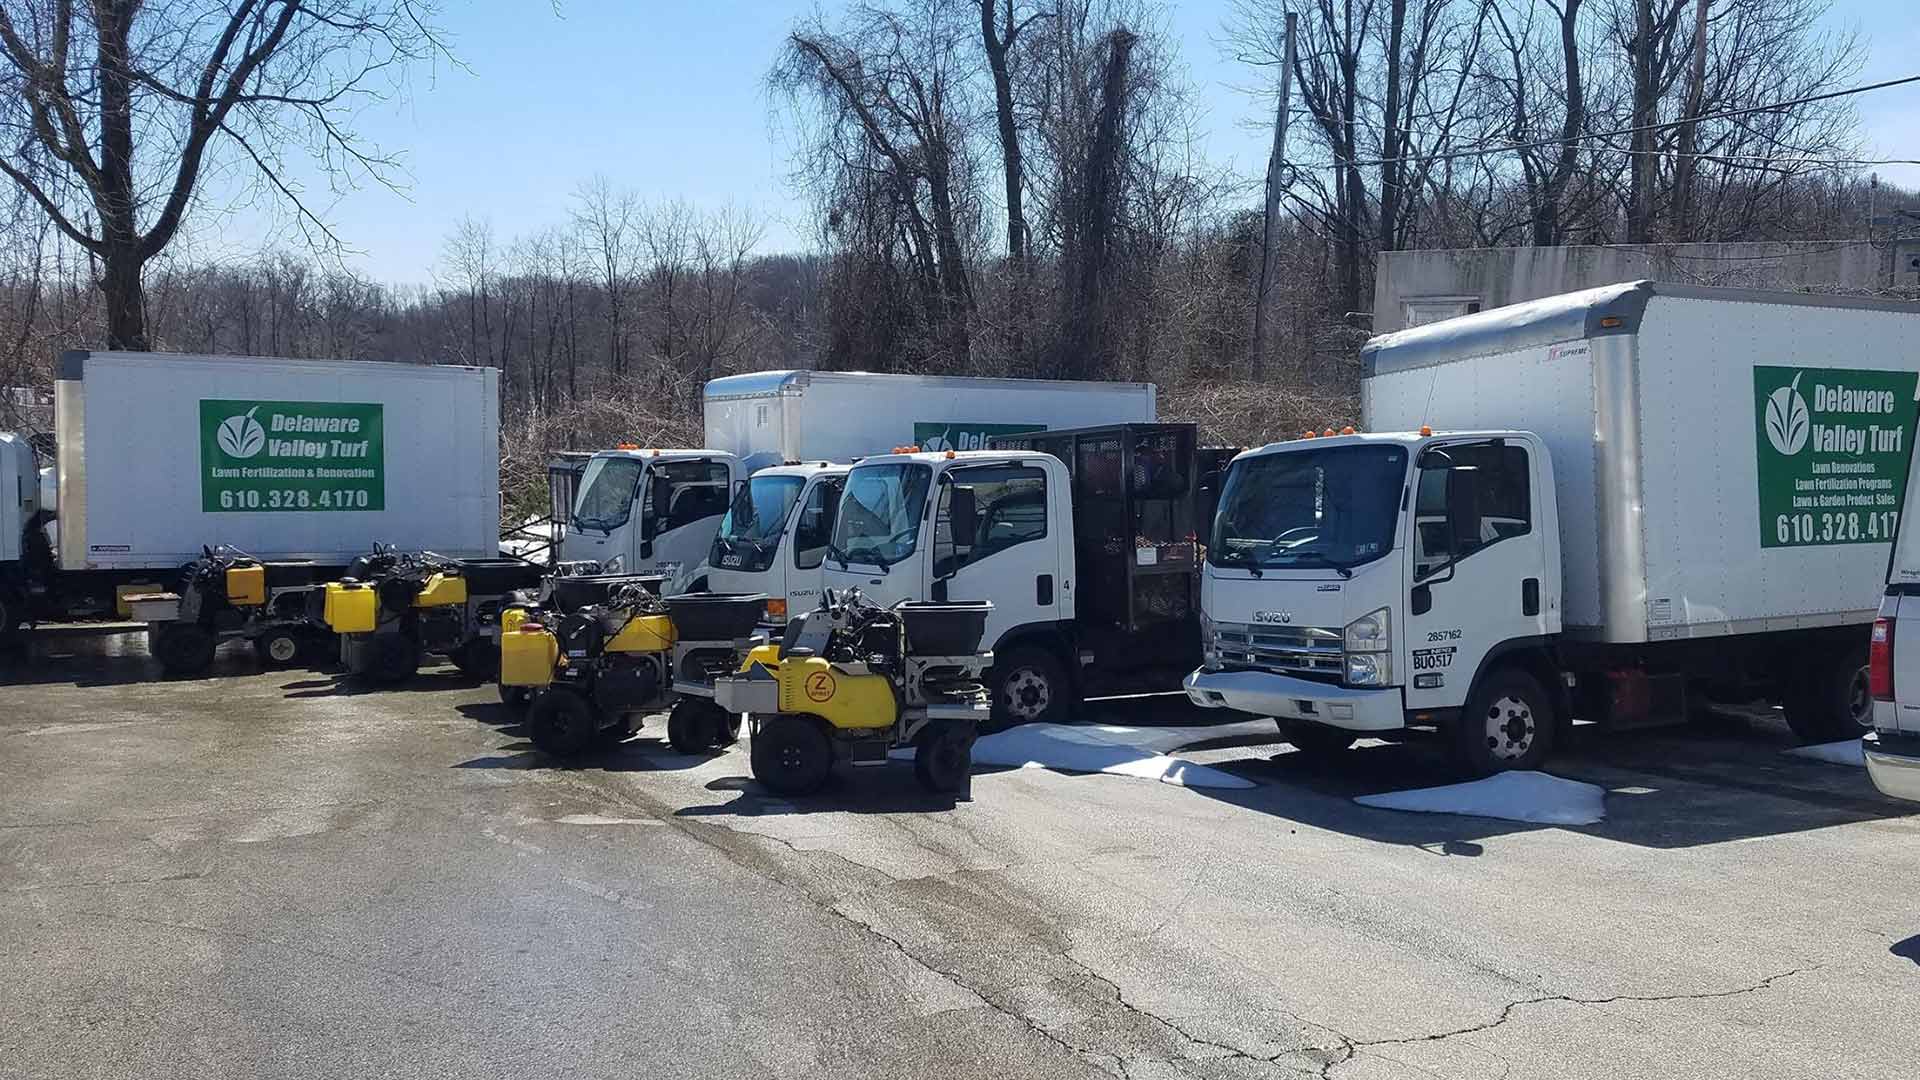 A parking lot of Delaware Valley Turf equipment.